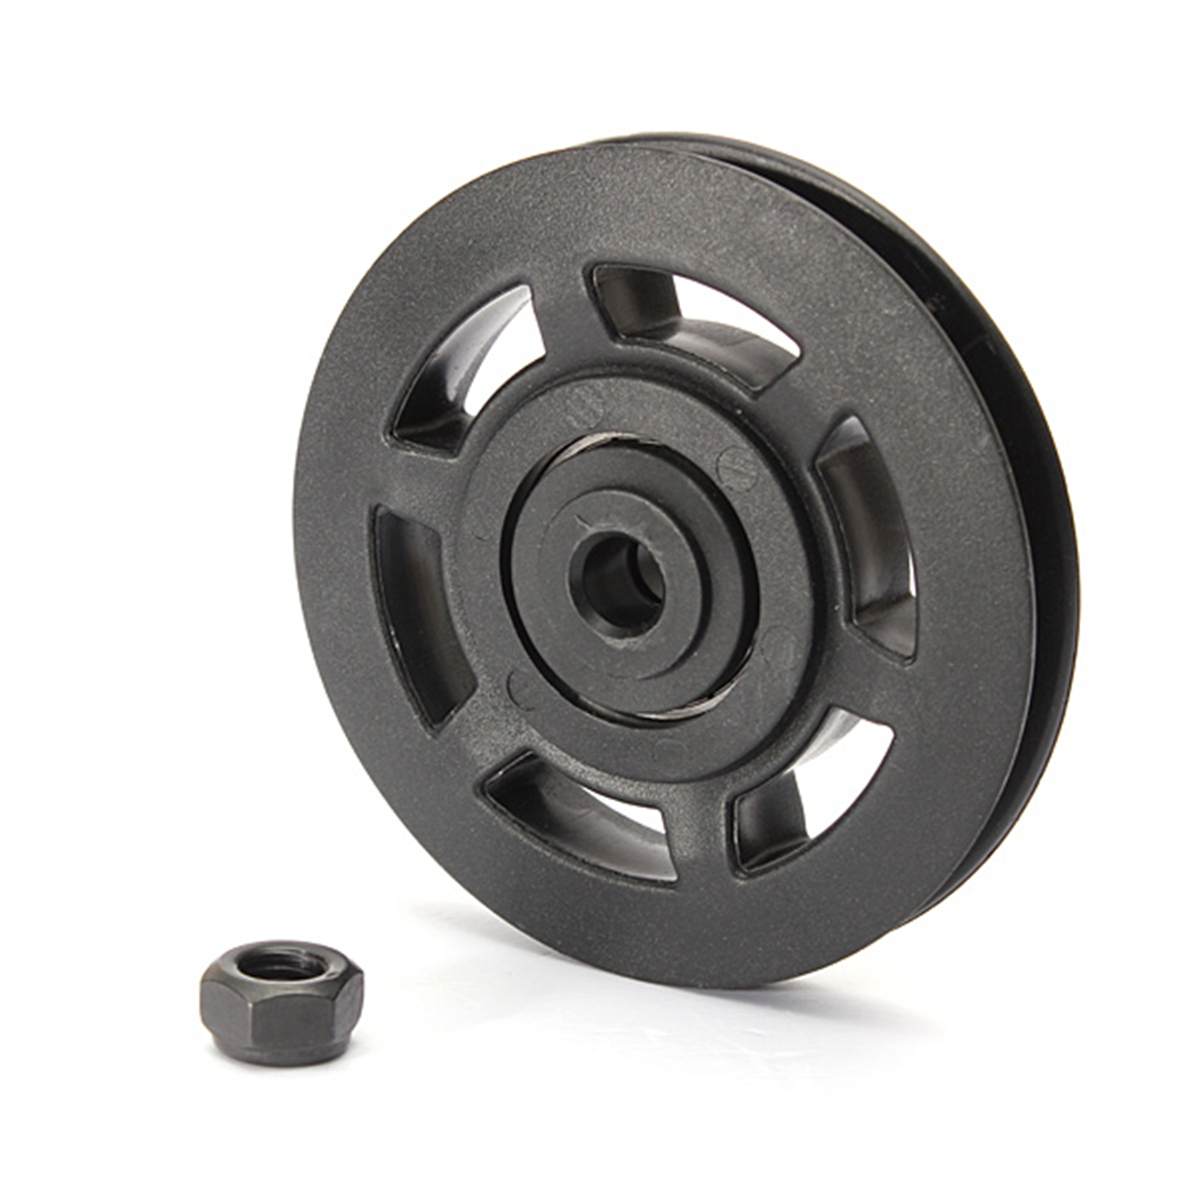 Universal 95mm Diameter Wearproof Nylon Bearing Pulley Wheel Cable Gym Fitness Equipment Part